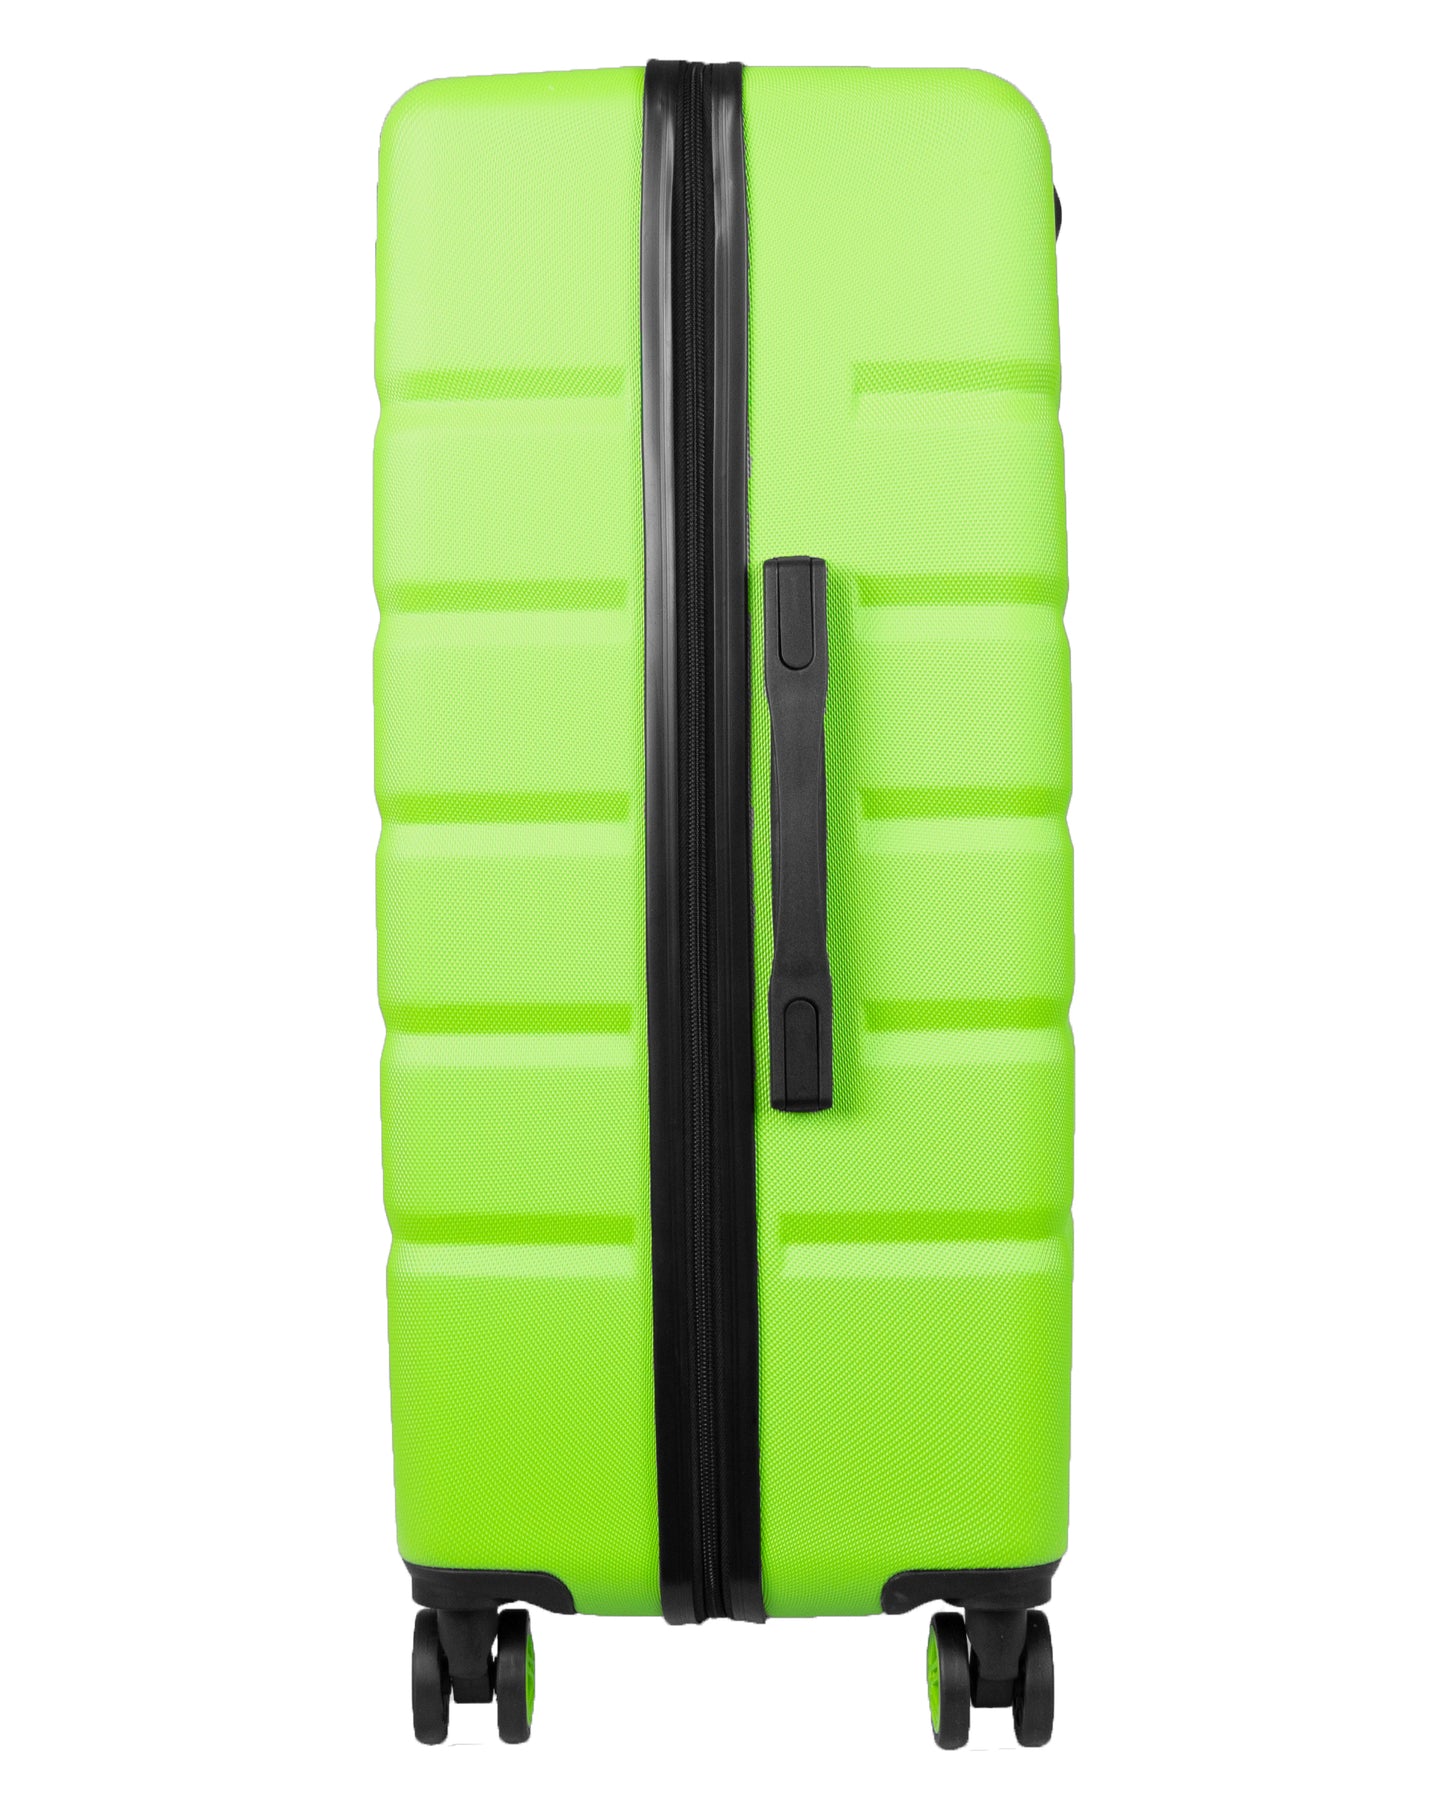 Hard Shell Luggage with 4 Spinner Wheels, Green